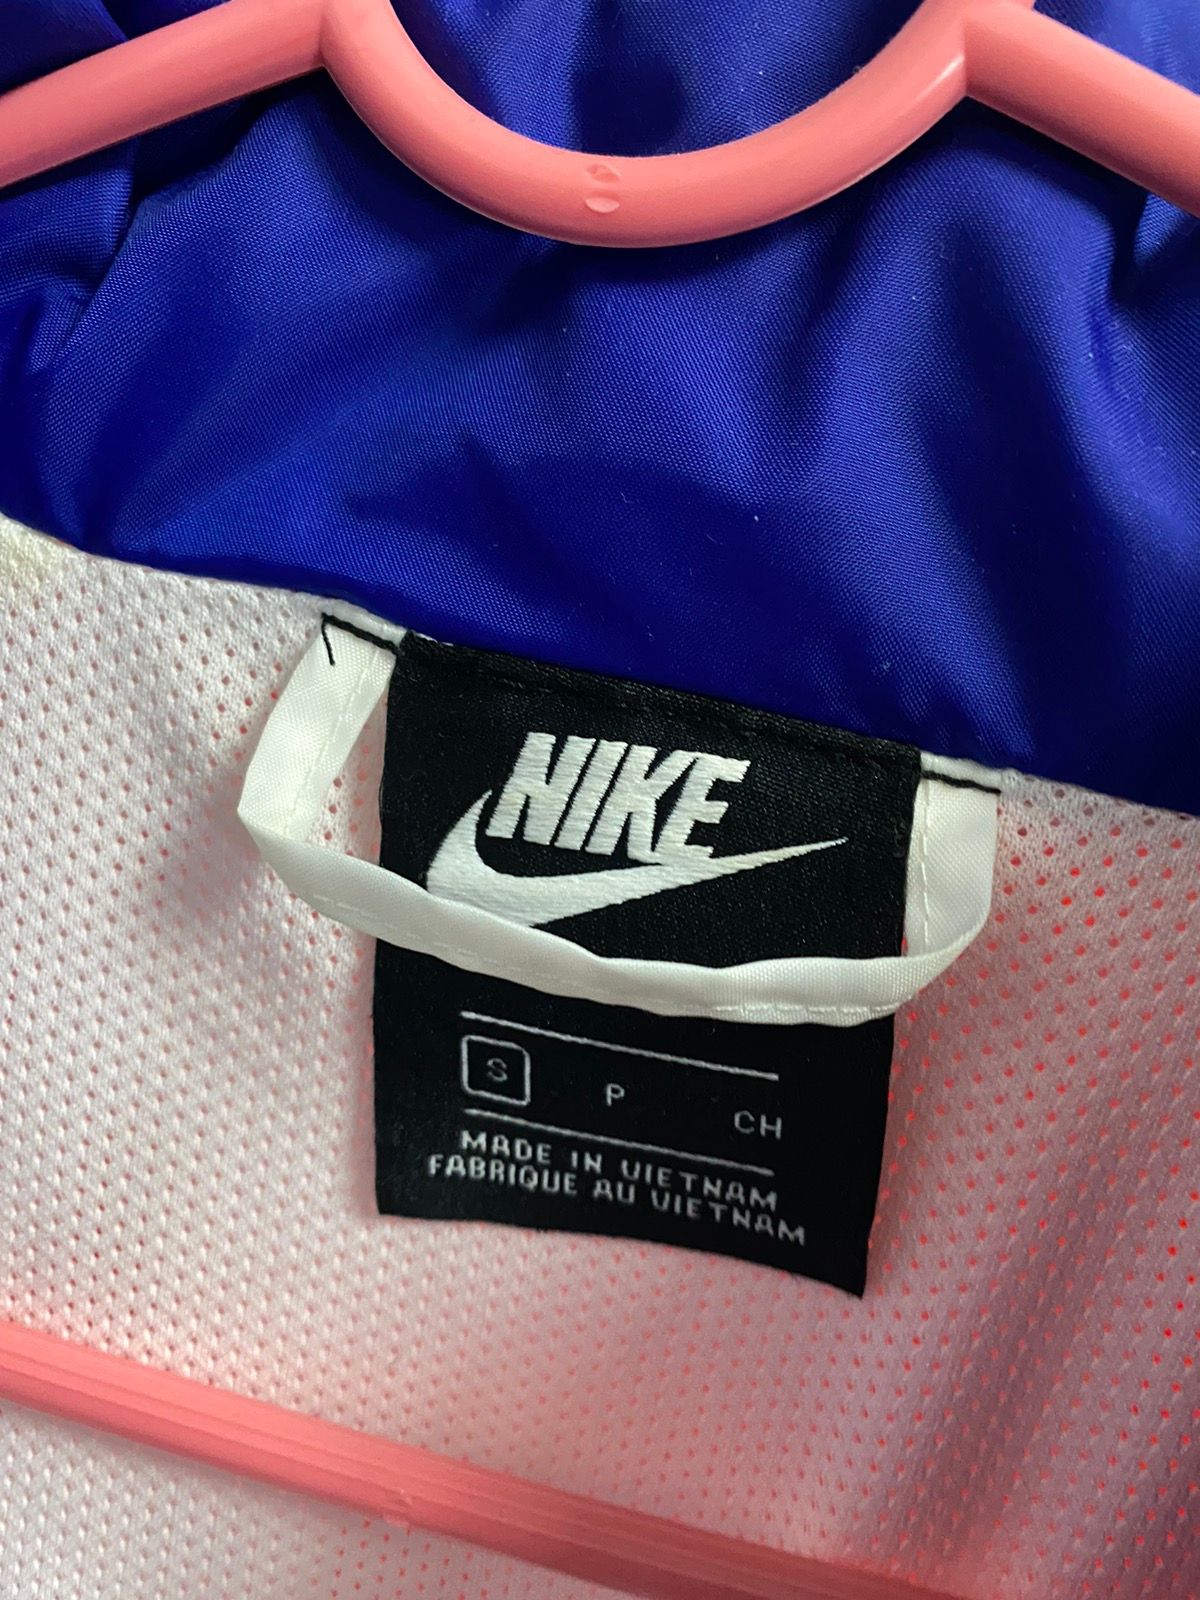 Nike Nike tracksuit Size US S / EU 44-46 / 1 - 3 Preview